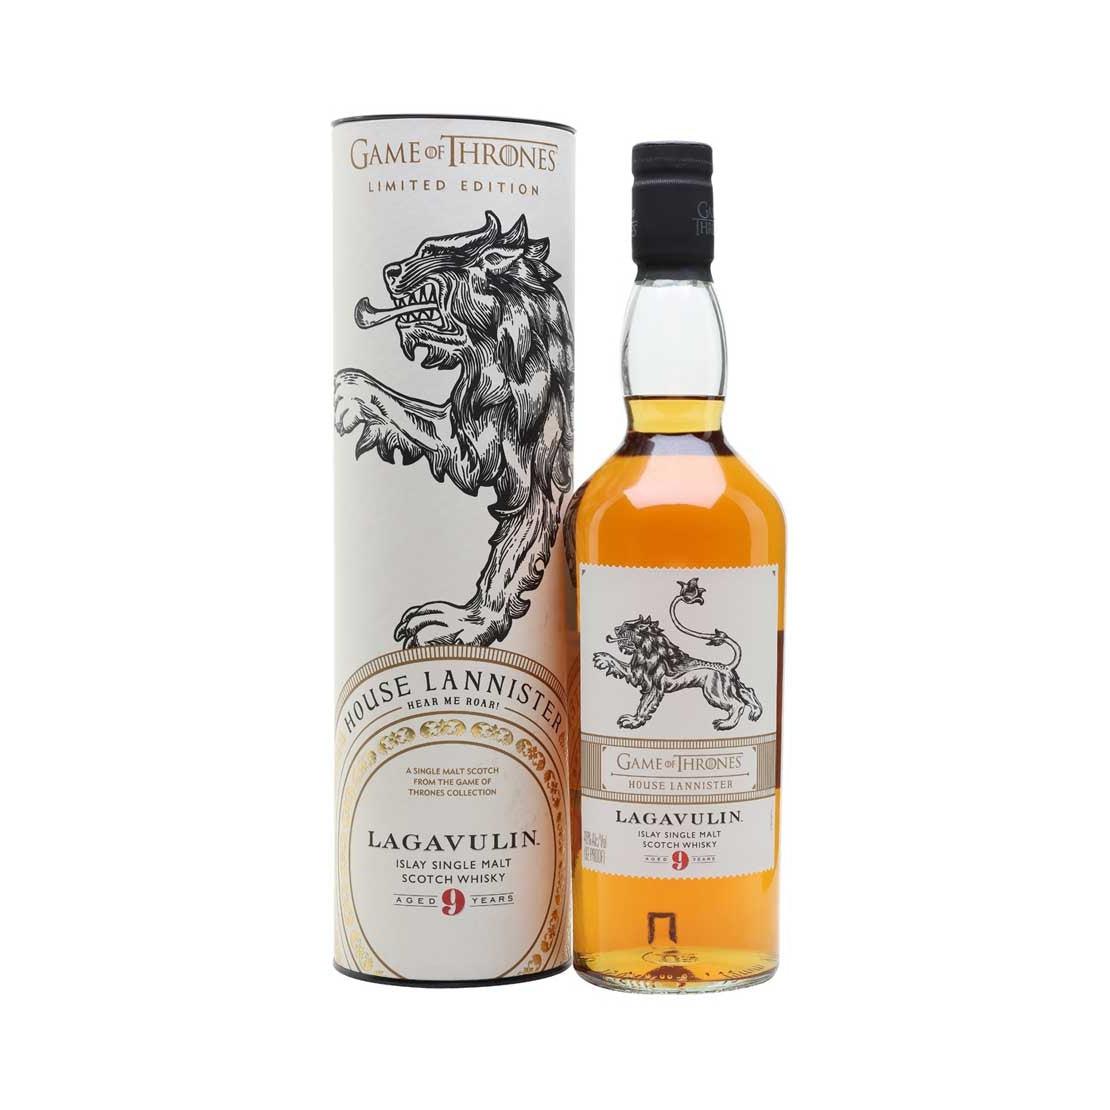 Lagavulin 9 Year Old Game of Thrones House Lannister Limited Edition Single Malt Scotch Whisky 700ml